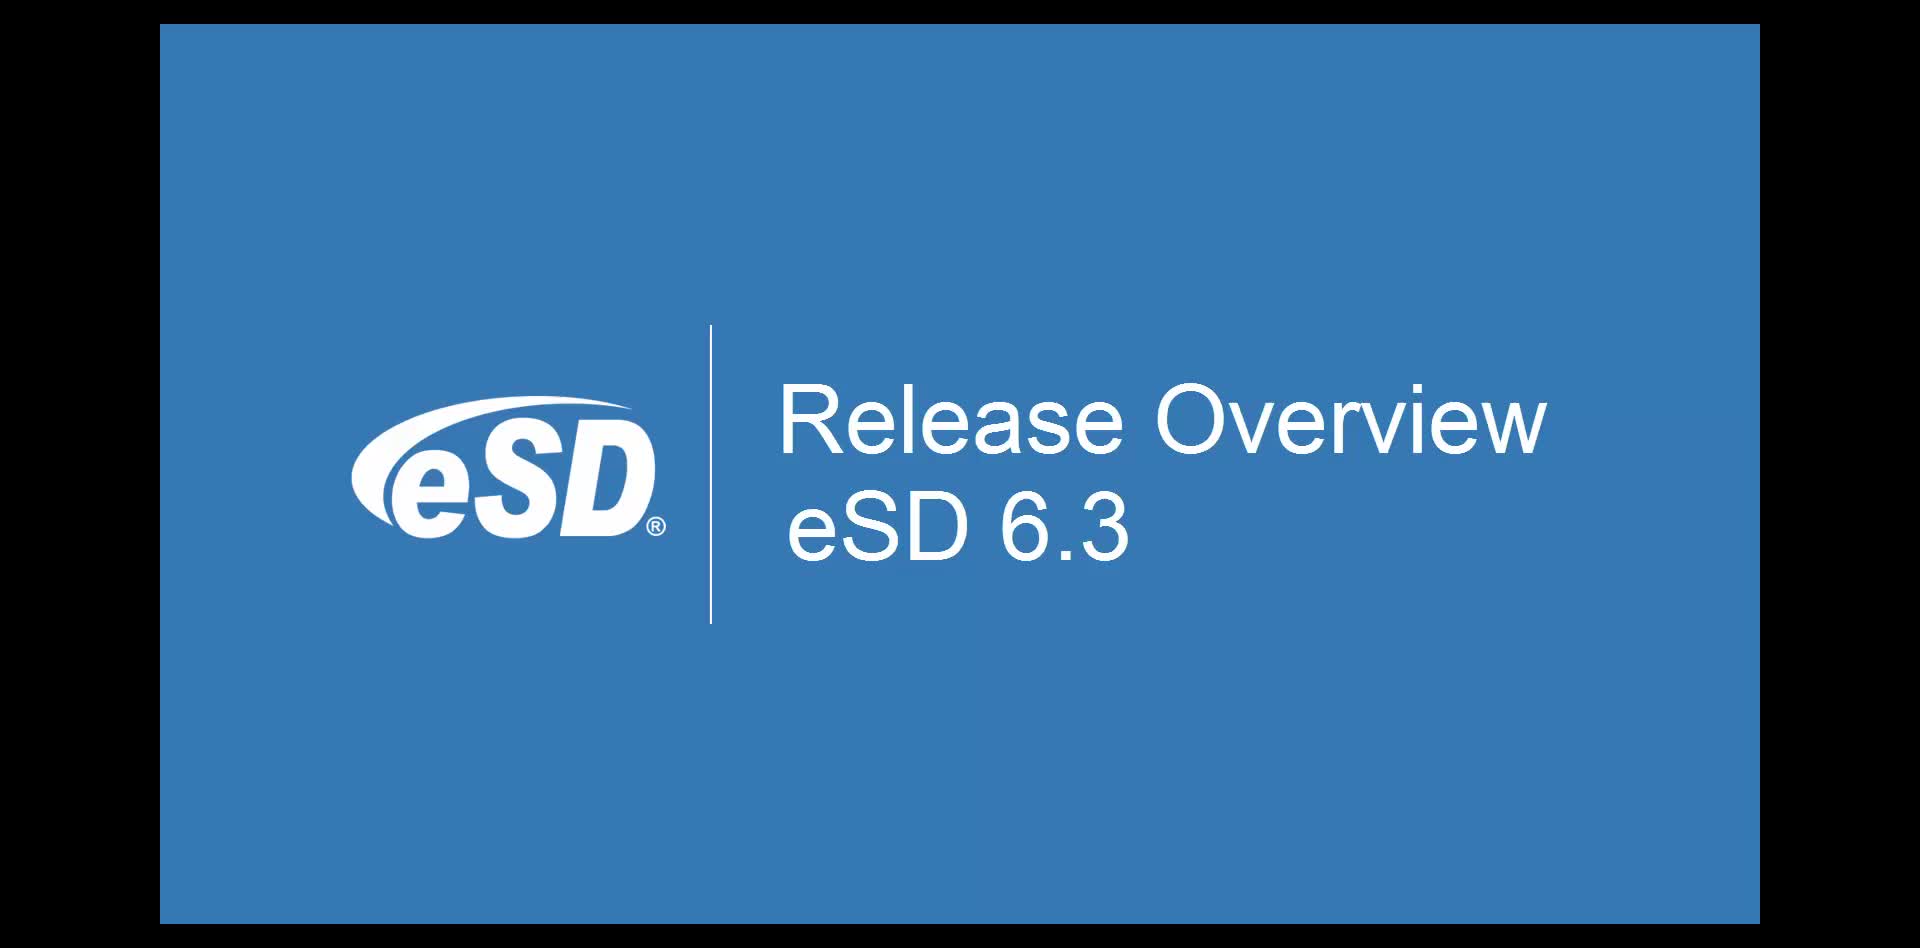 eSD 6.3 Release Overview